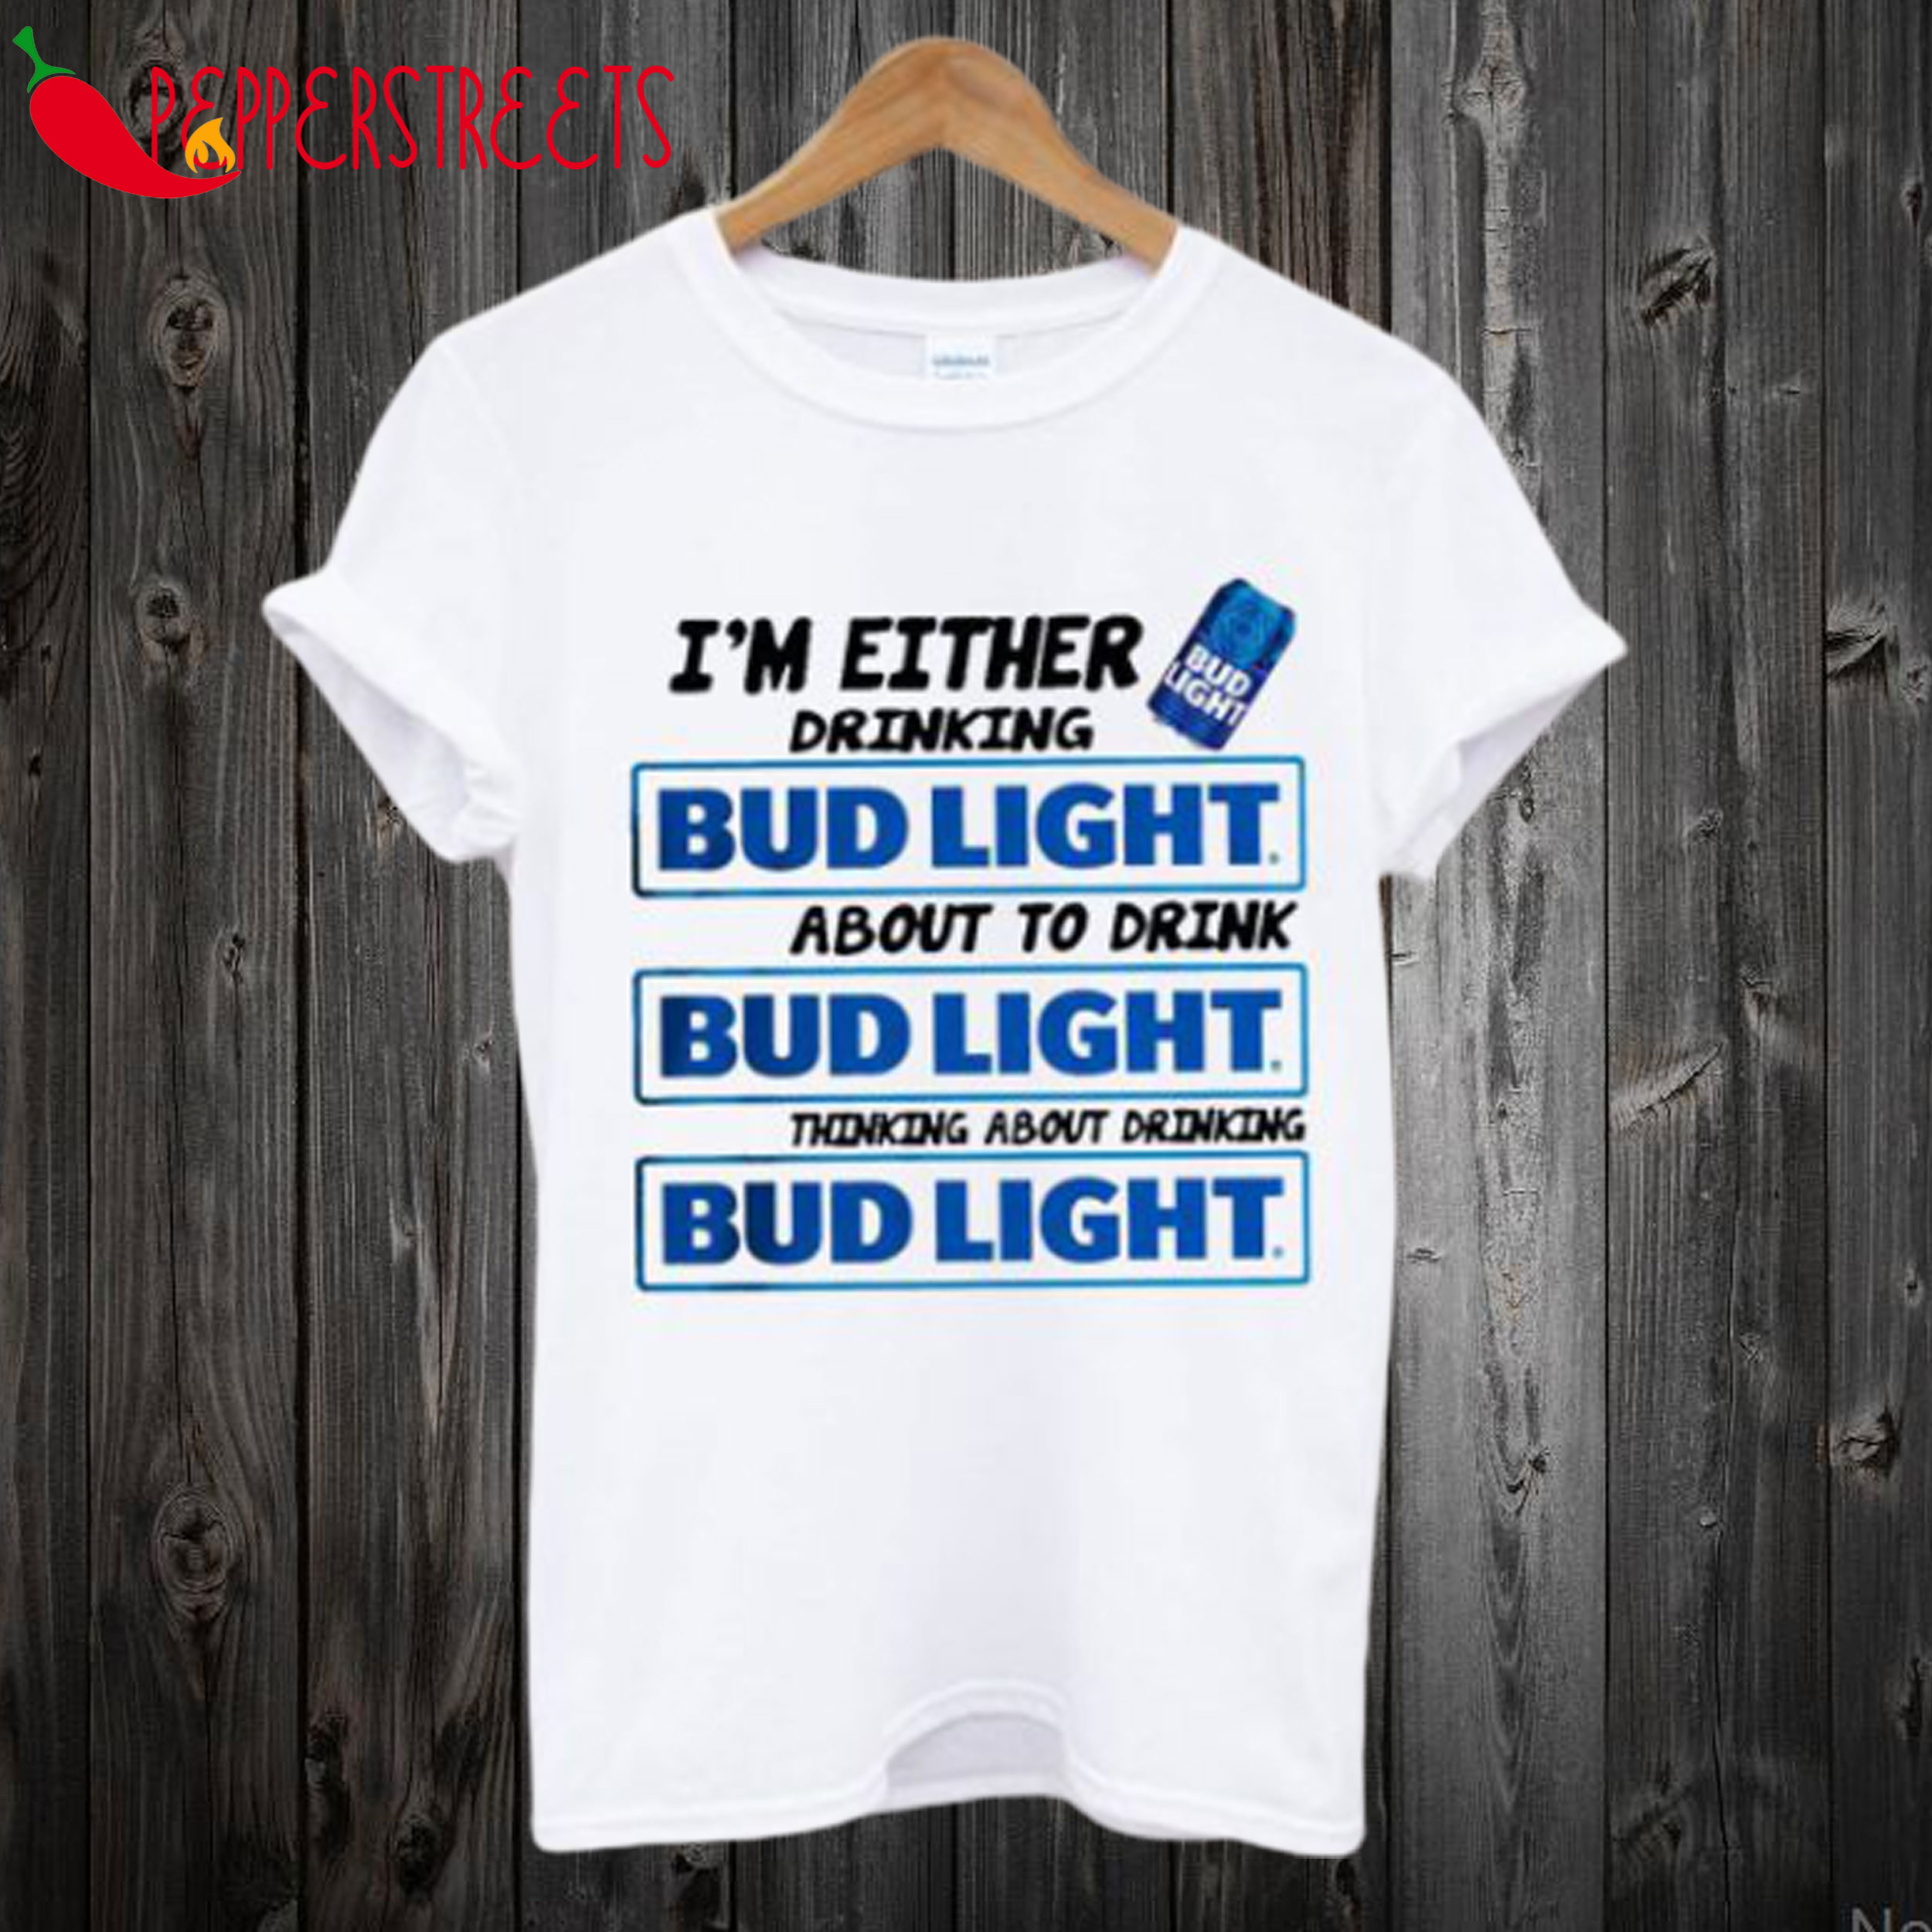 A I’m Either Drinking Bud Light T-Shirt